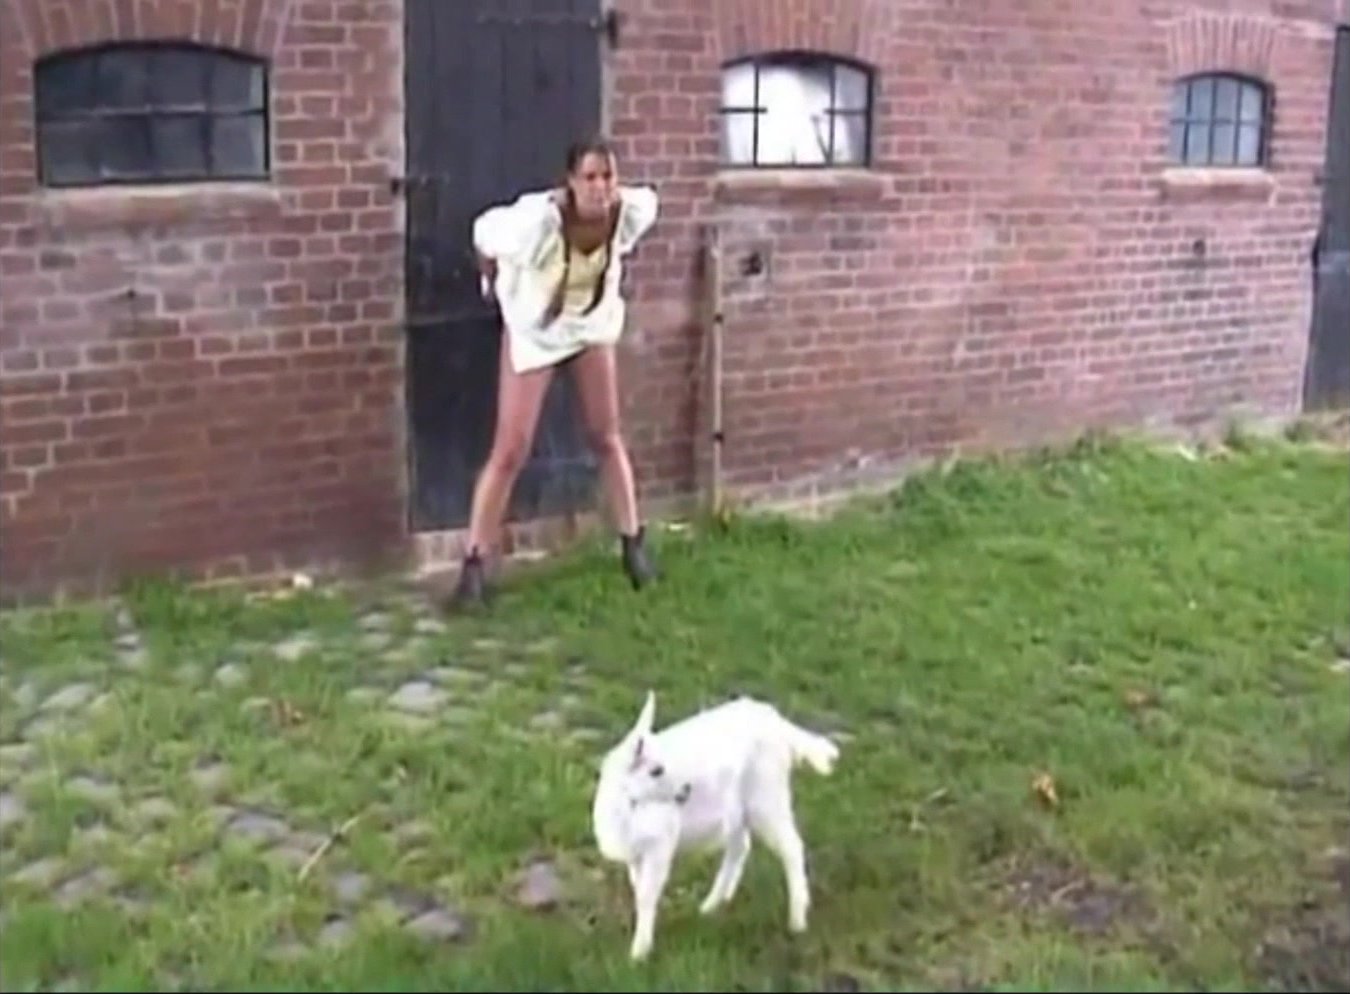 Third world piss with goat watching!